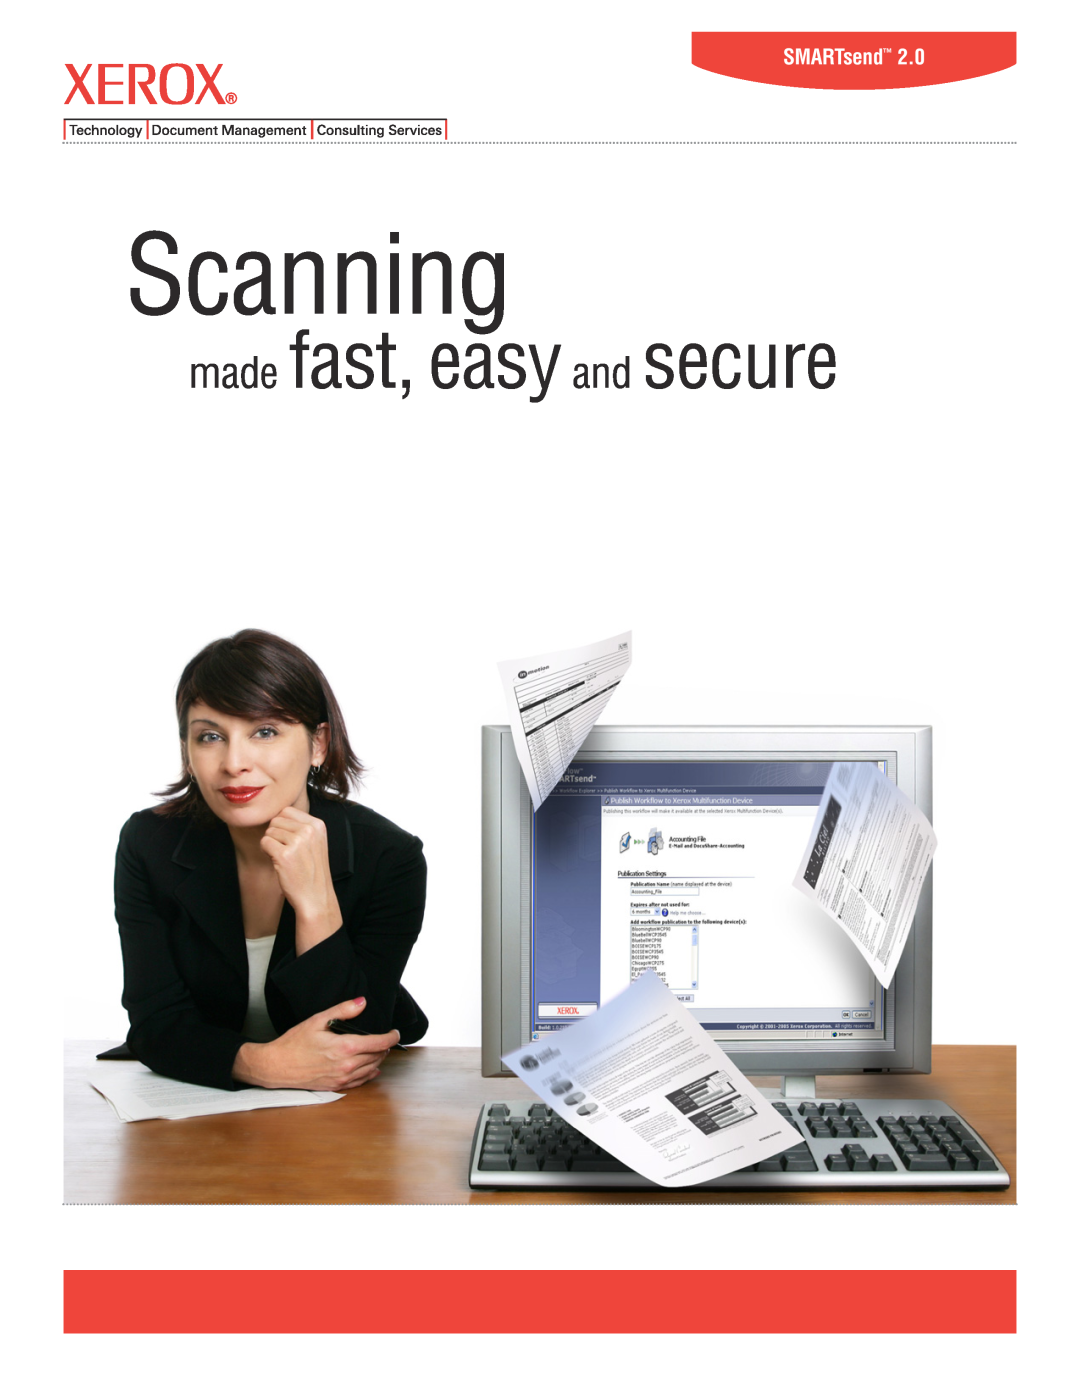 Xerox 2.0 manual SMARTsend, Scanning, made fast, easy and secure 